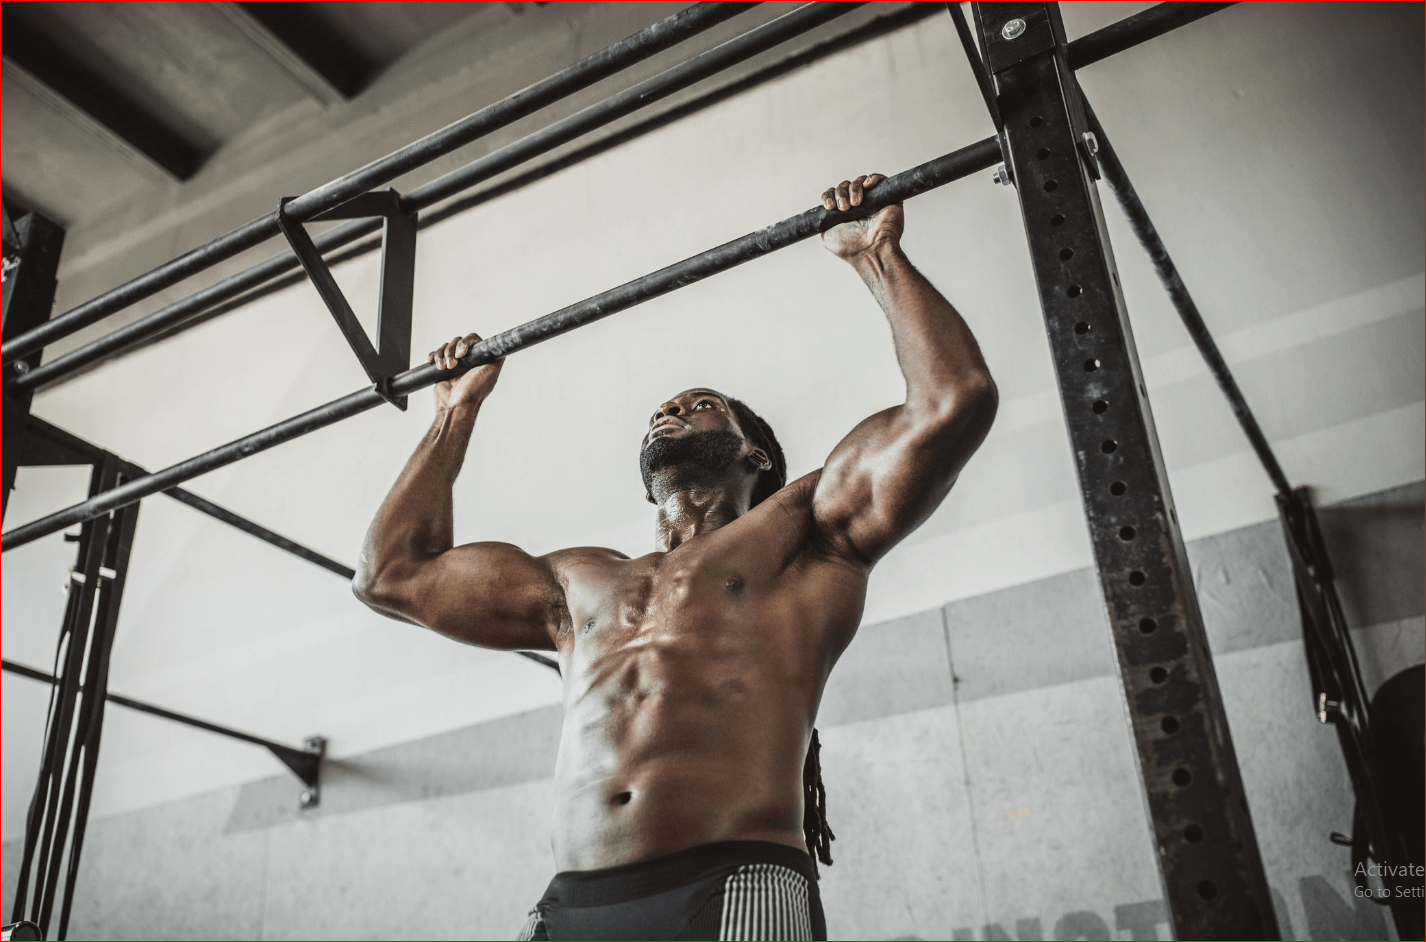 Still not convinced Here are FAQs about doing 20 pull ups a day.